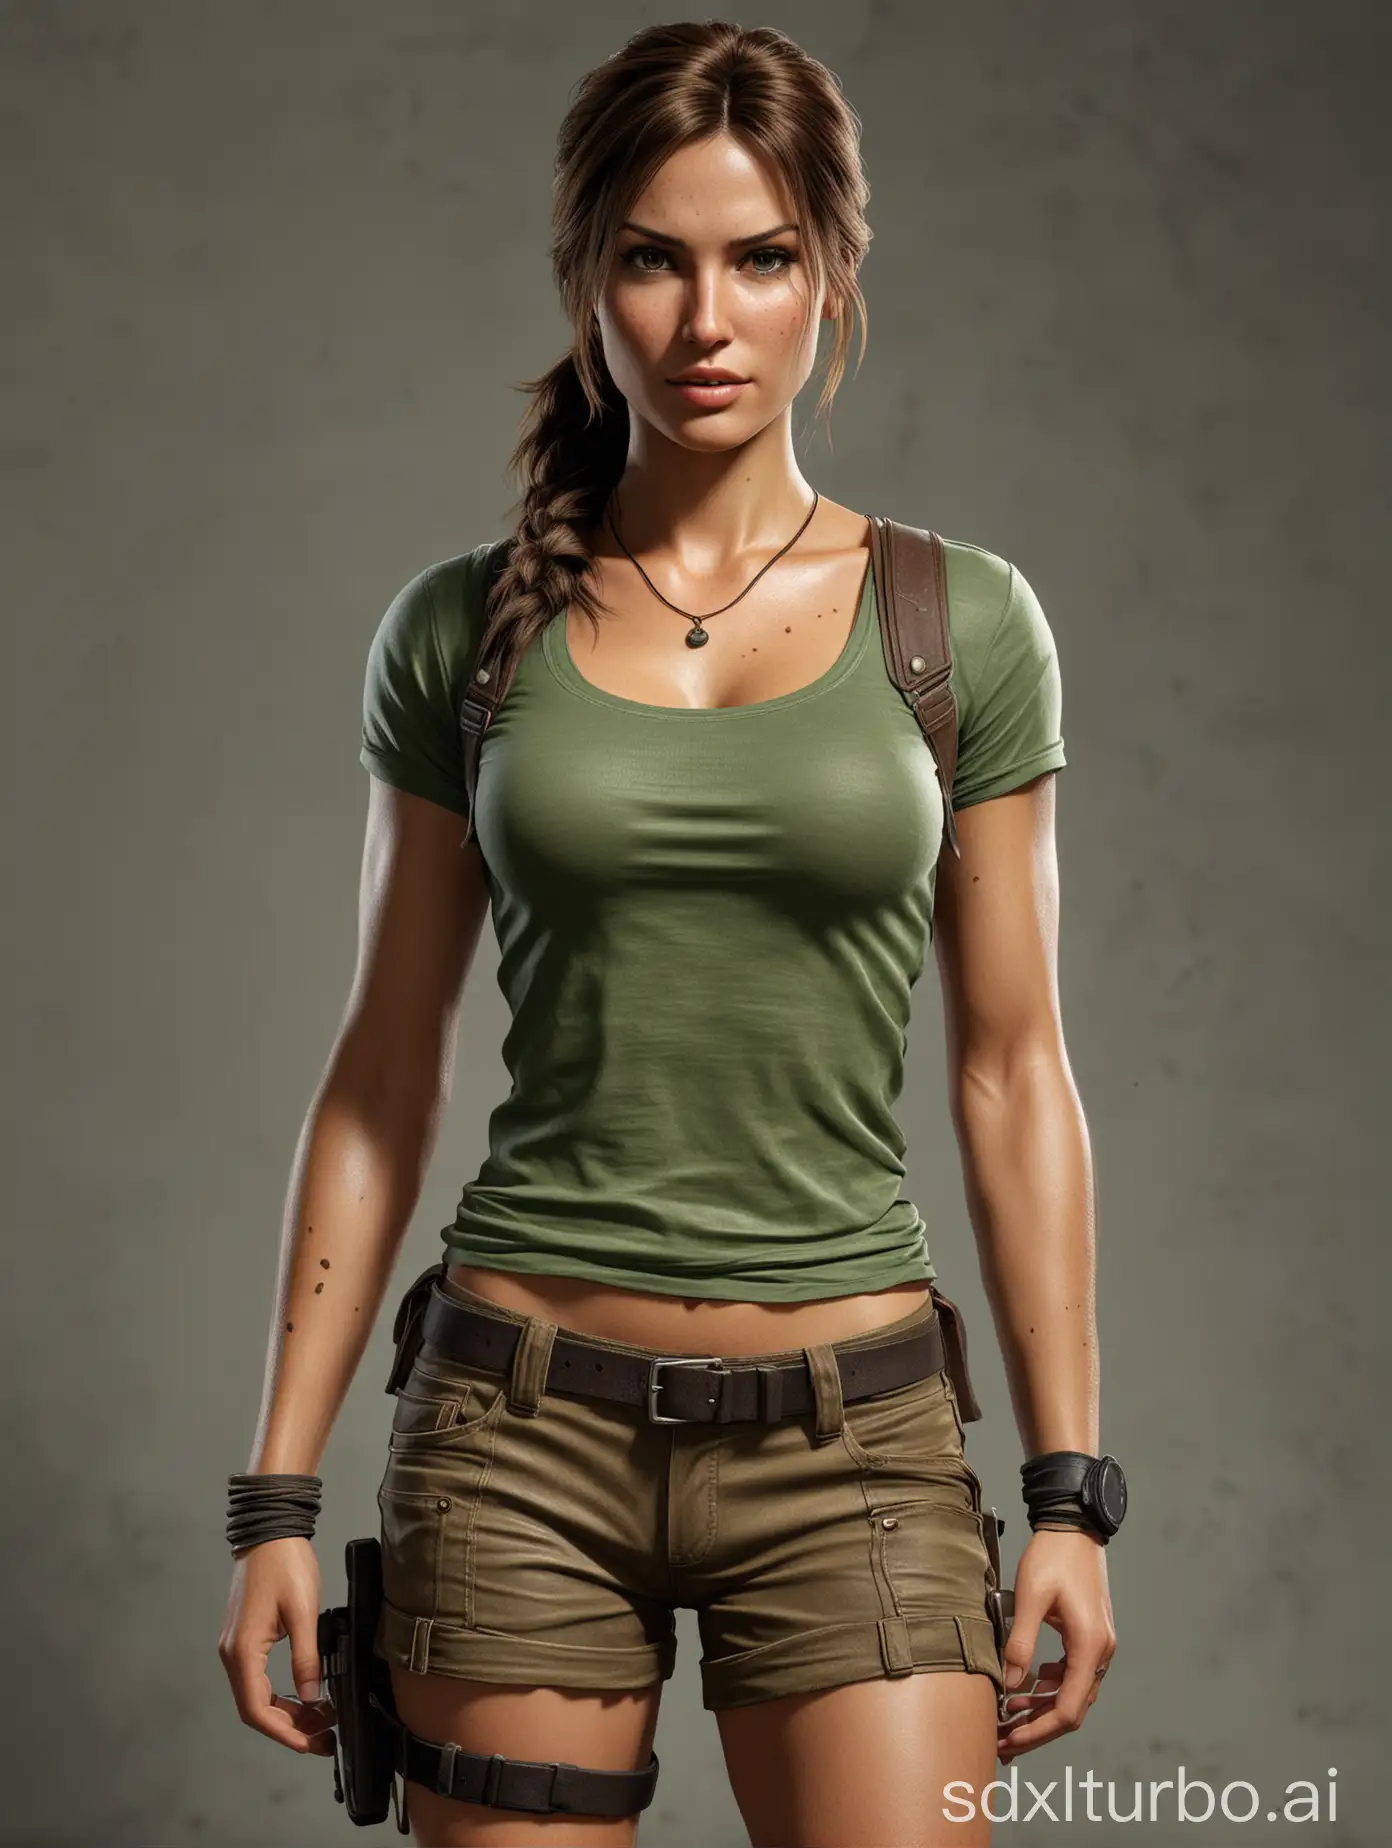 A digital image of a character from the Tomb Raider franchise, wearing a green top and brown shorts.